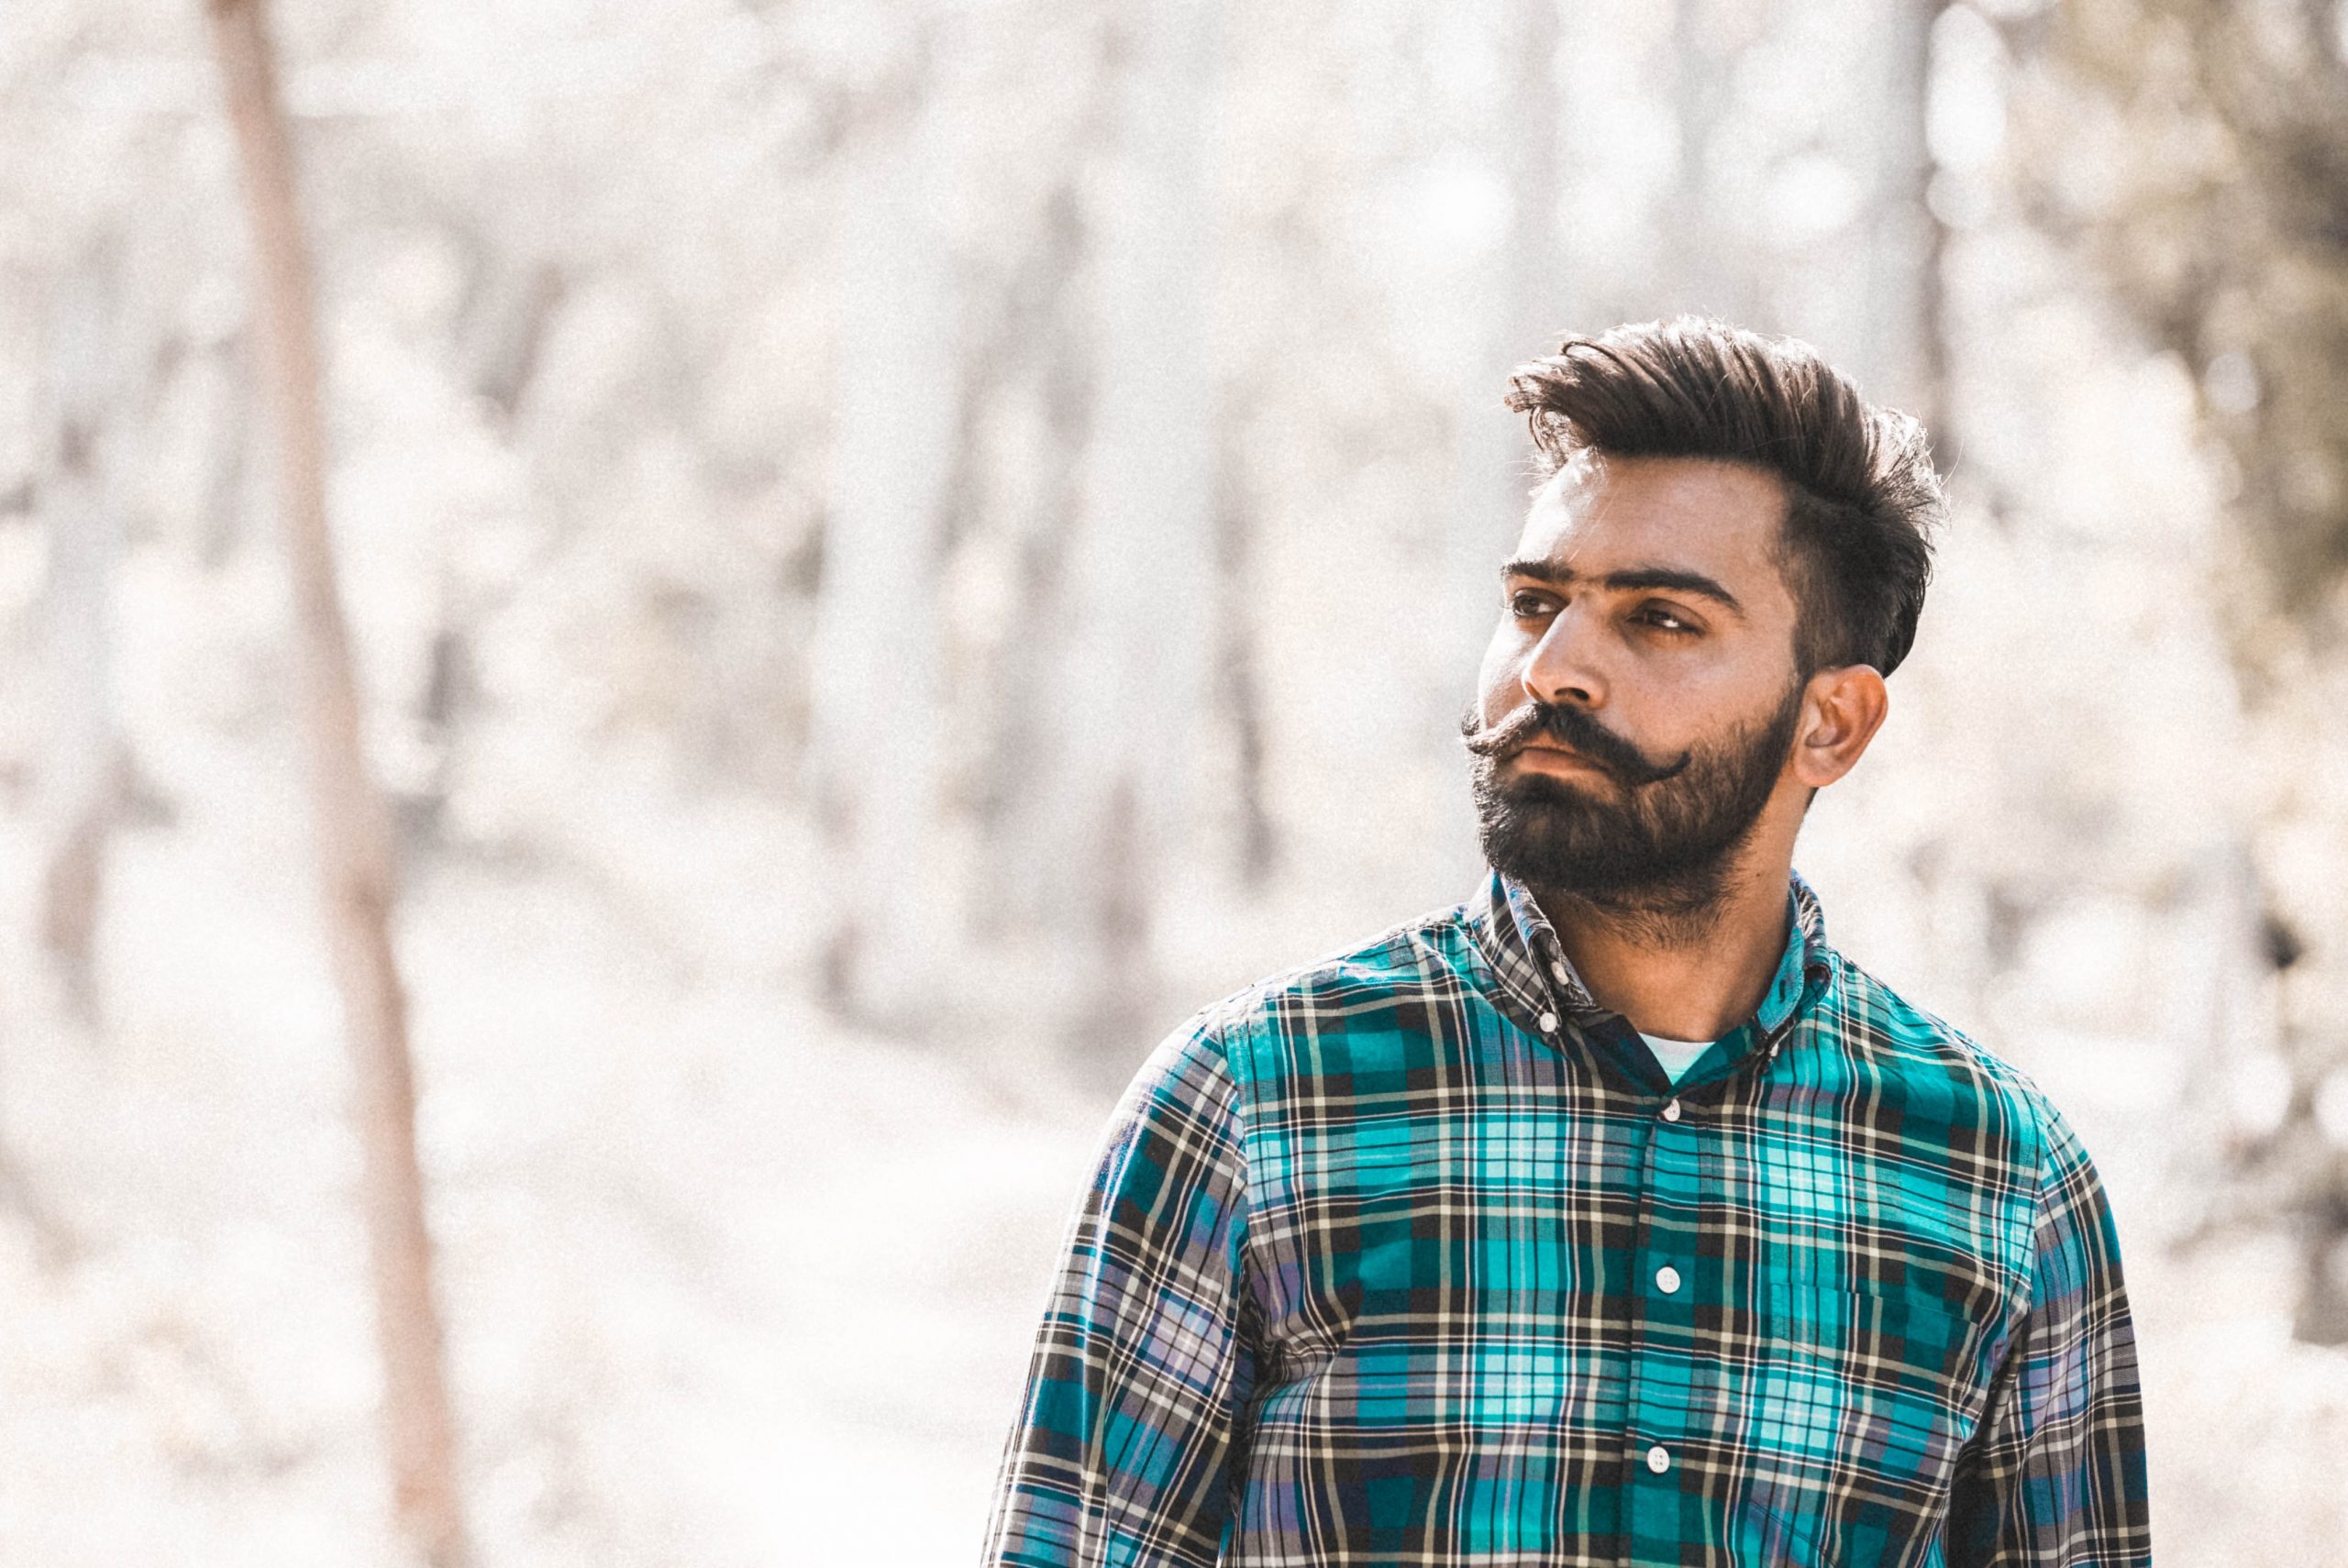 Beard Oil Recipes You Can Easily Make At Home, For Soft Strands & Healthy Skin